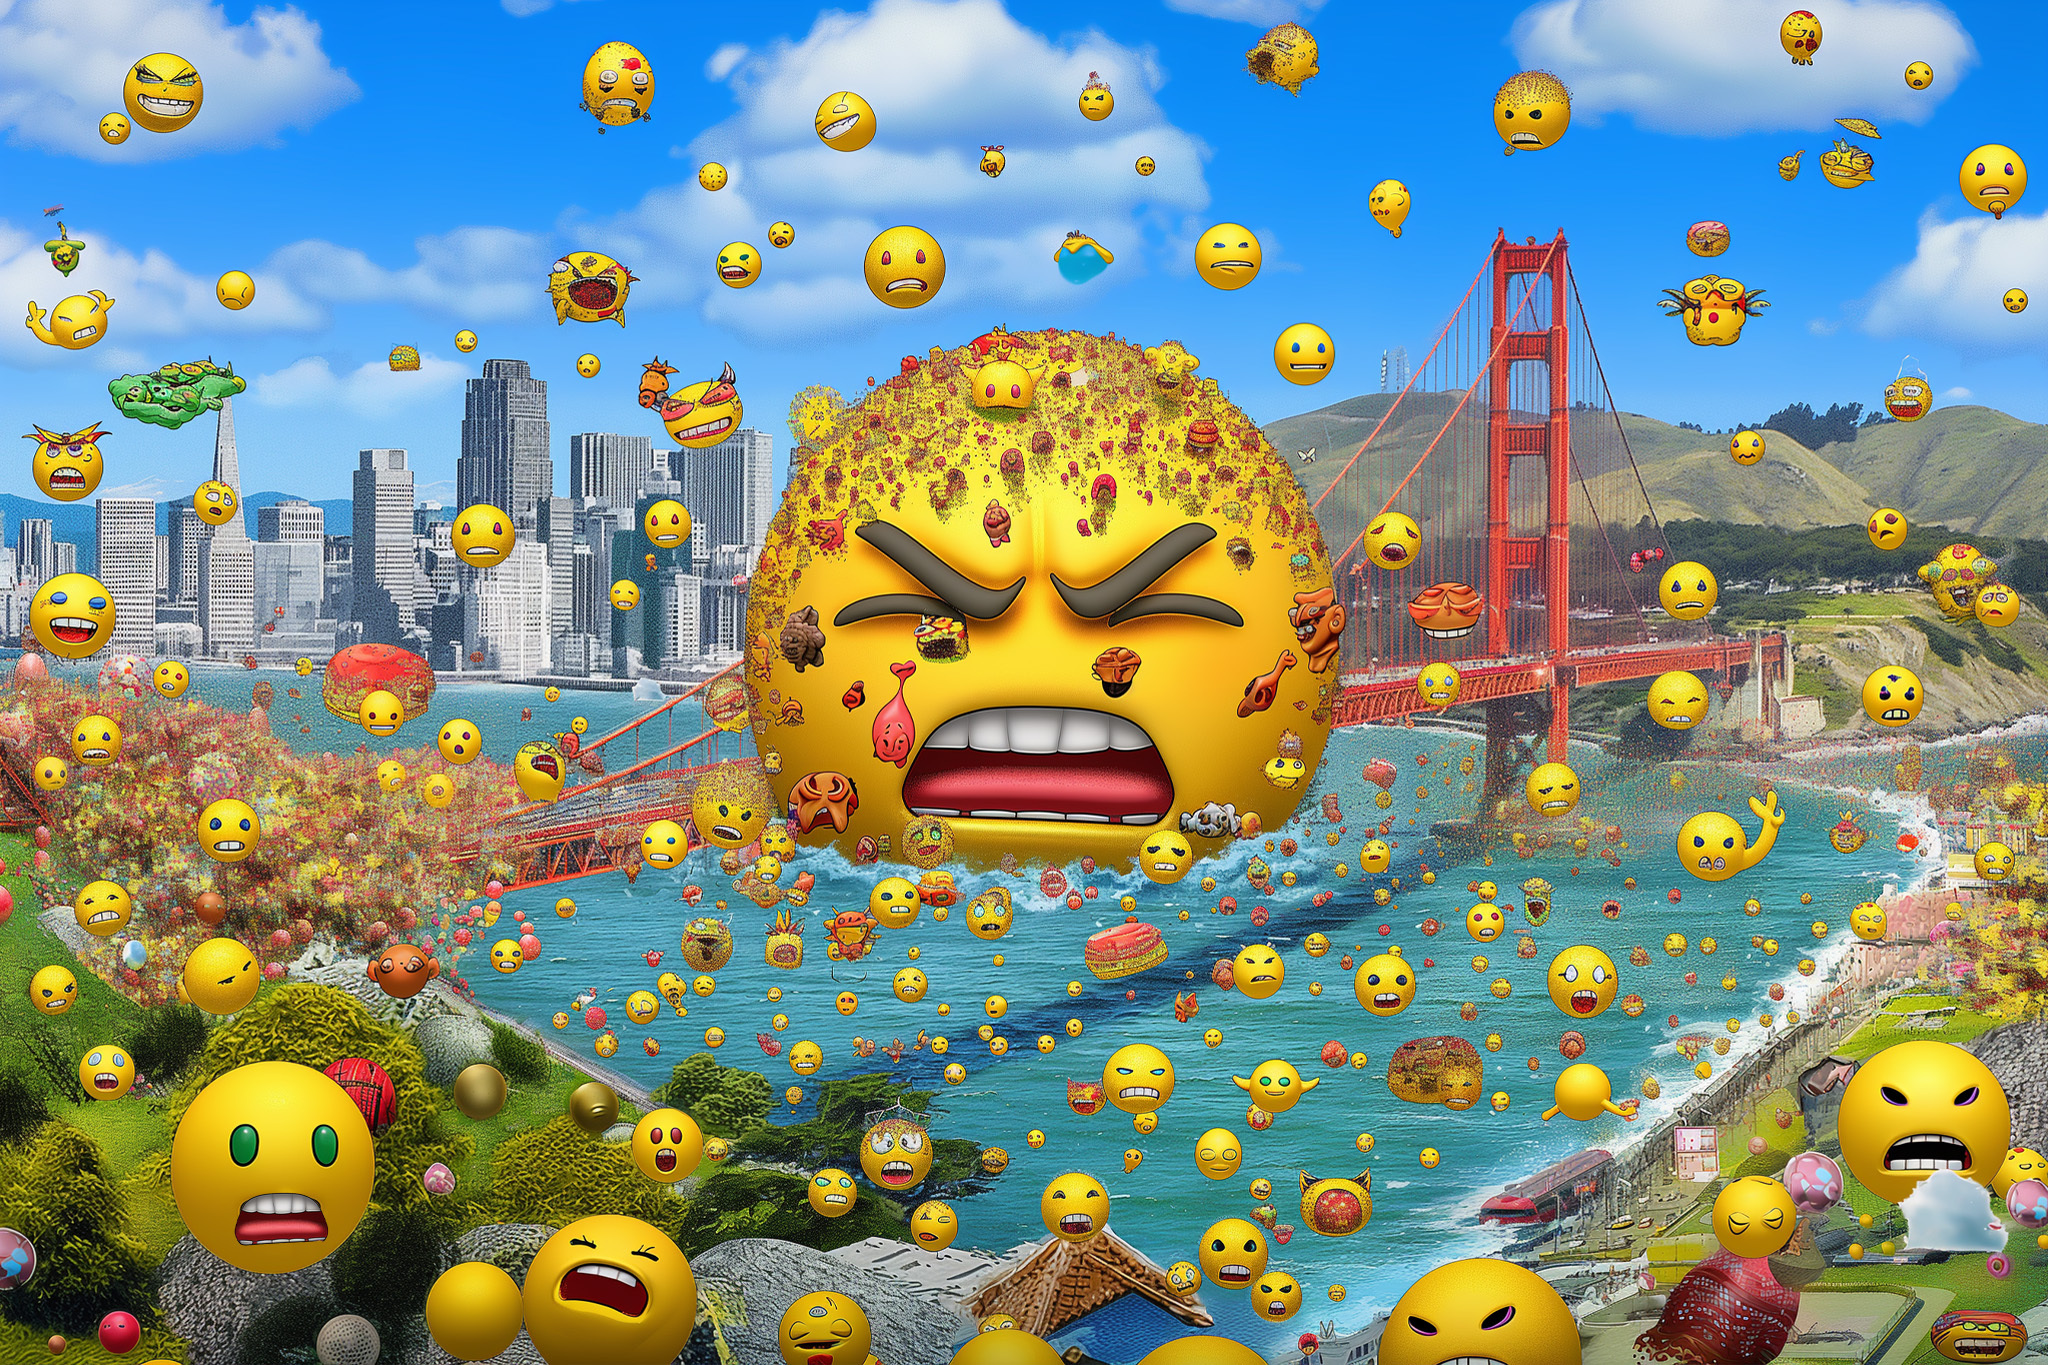 A vibrant scene with numerous emojis of various expressions floating over a cityscape with the Golden Gate Bridge in the background.